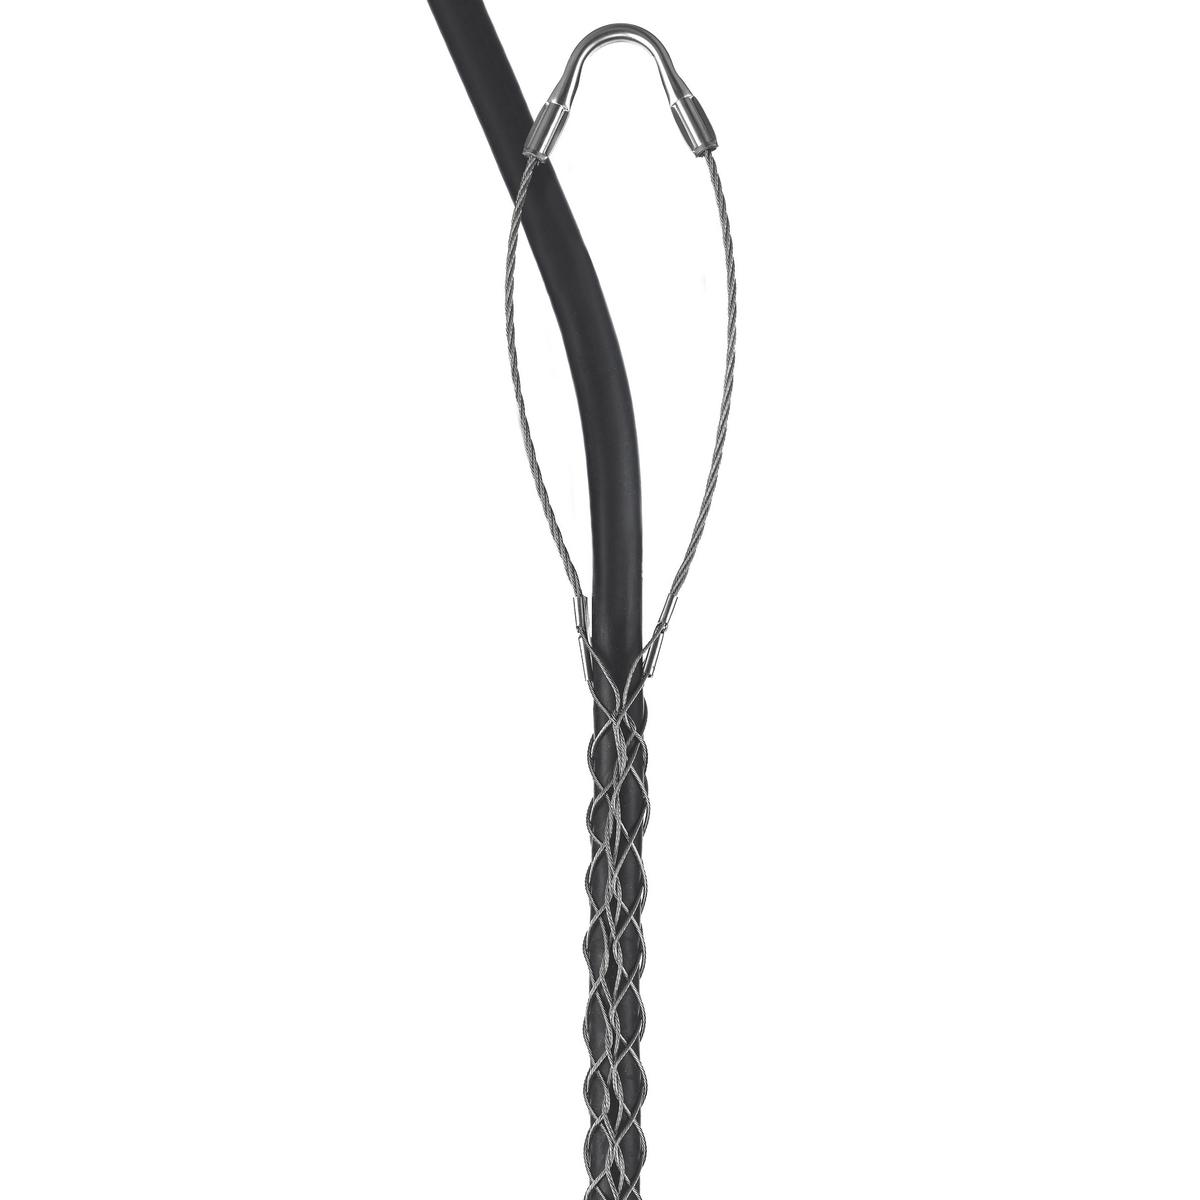 Hubbell 02402019 Support Grips, Single Eye, Single Weave, Split Mesh, Lace Closing, Stainless Steel, 1.50-1.74"  ; Single eye ; Strand equalizers position wires for equal loading throughout grip length ; Eye assemblies provide eye reinforcement at support hardware ; Split